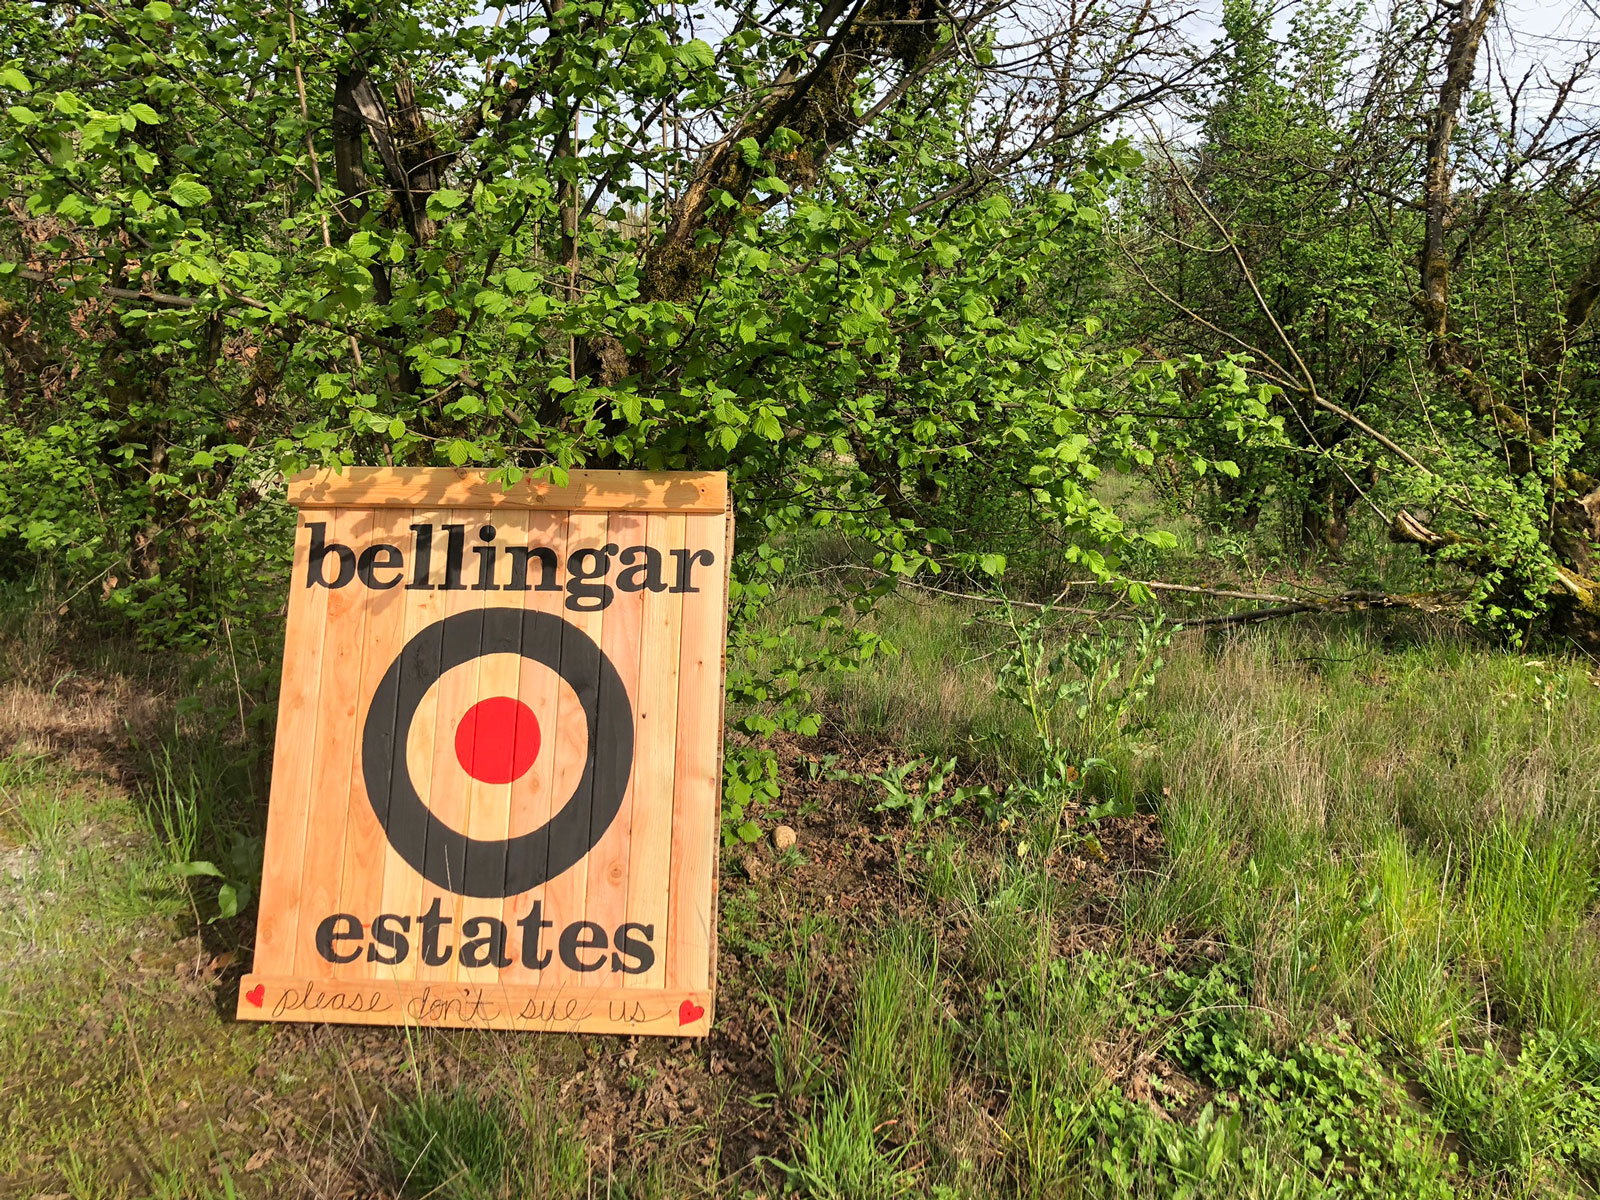 Sign for Bellingar Estates with a bullseye in the center